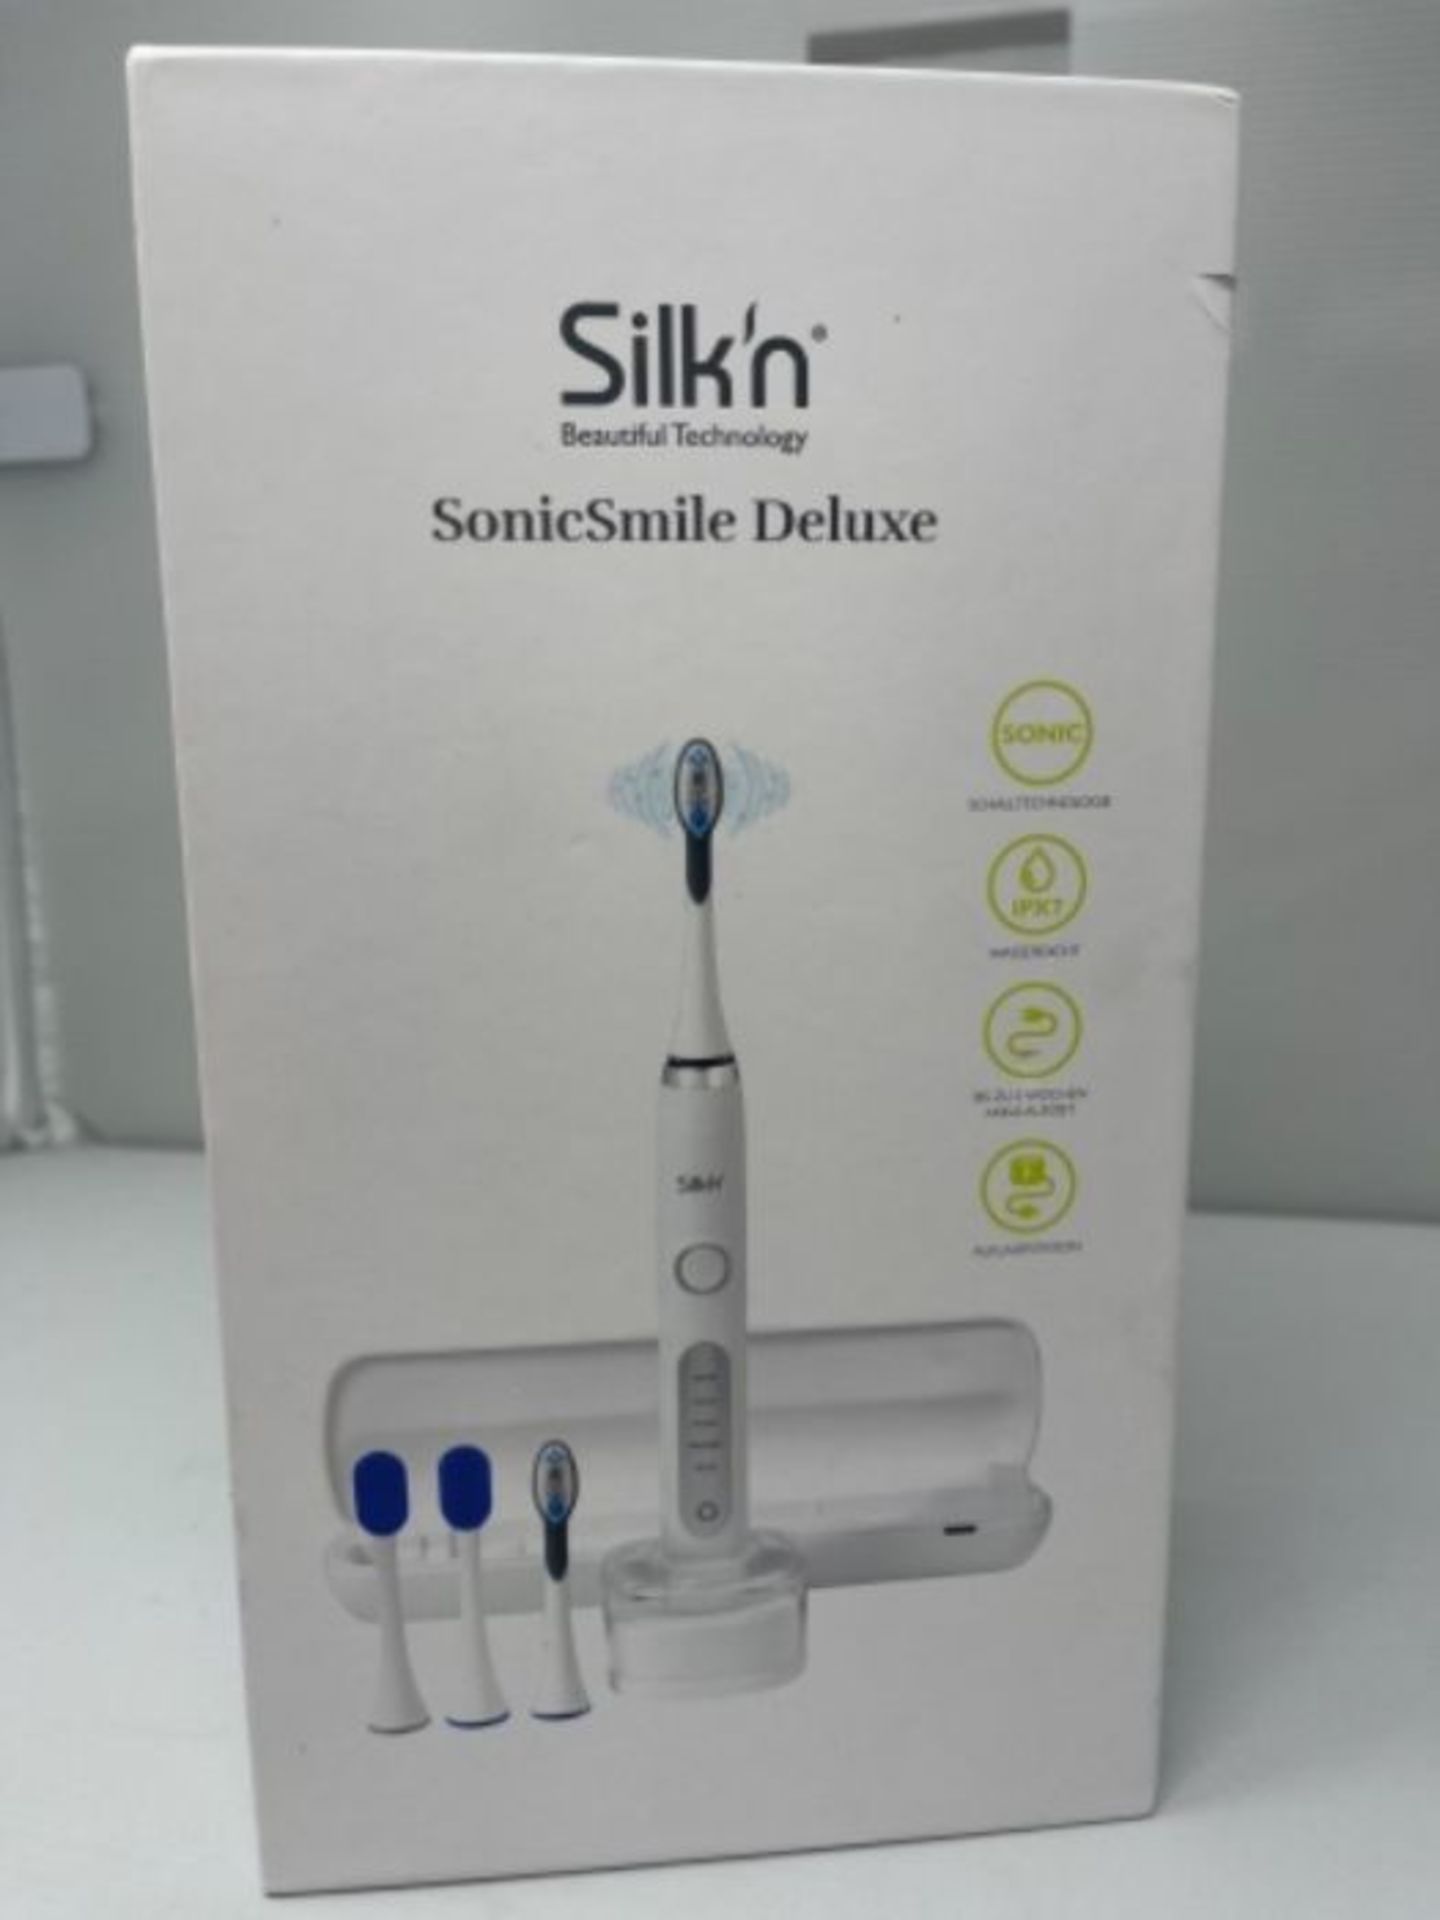 Silk'n SonicSmile Deluxe - Electric Toothbrush for Cleaner, Whiter Teeth 31.000 P.M. - - Image 3 of 3